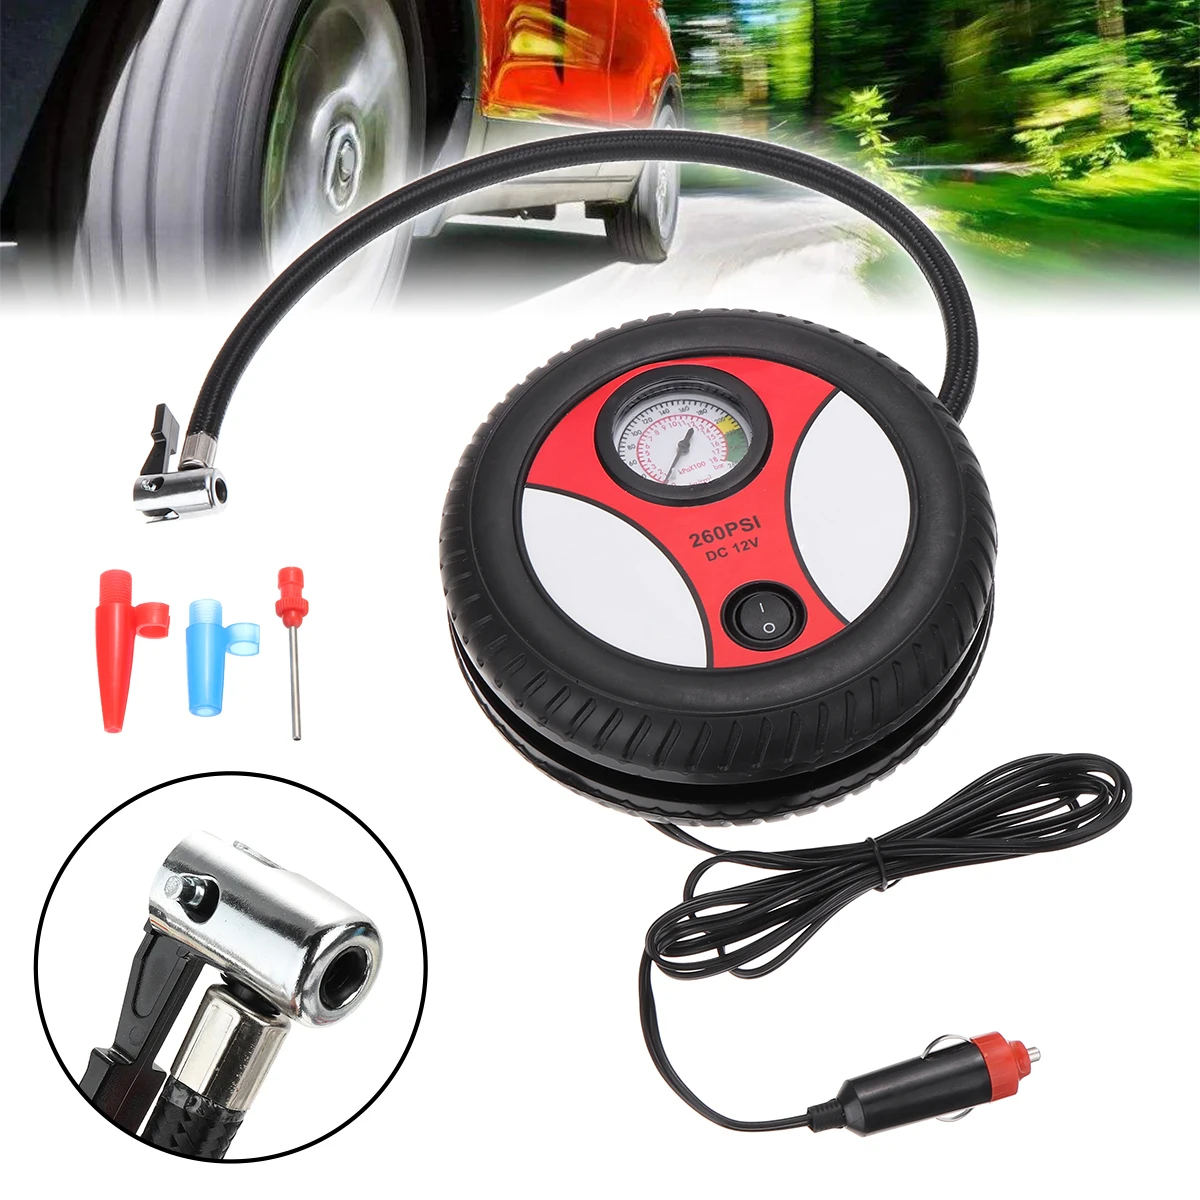 Digital Tyre Inflator Portable Electric 12V 260PSI Air Compressor Auto Car Tire Tyre Pump with LED Light Inflation Nozzle Adapters for Car Ball Bike Boat 